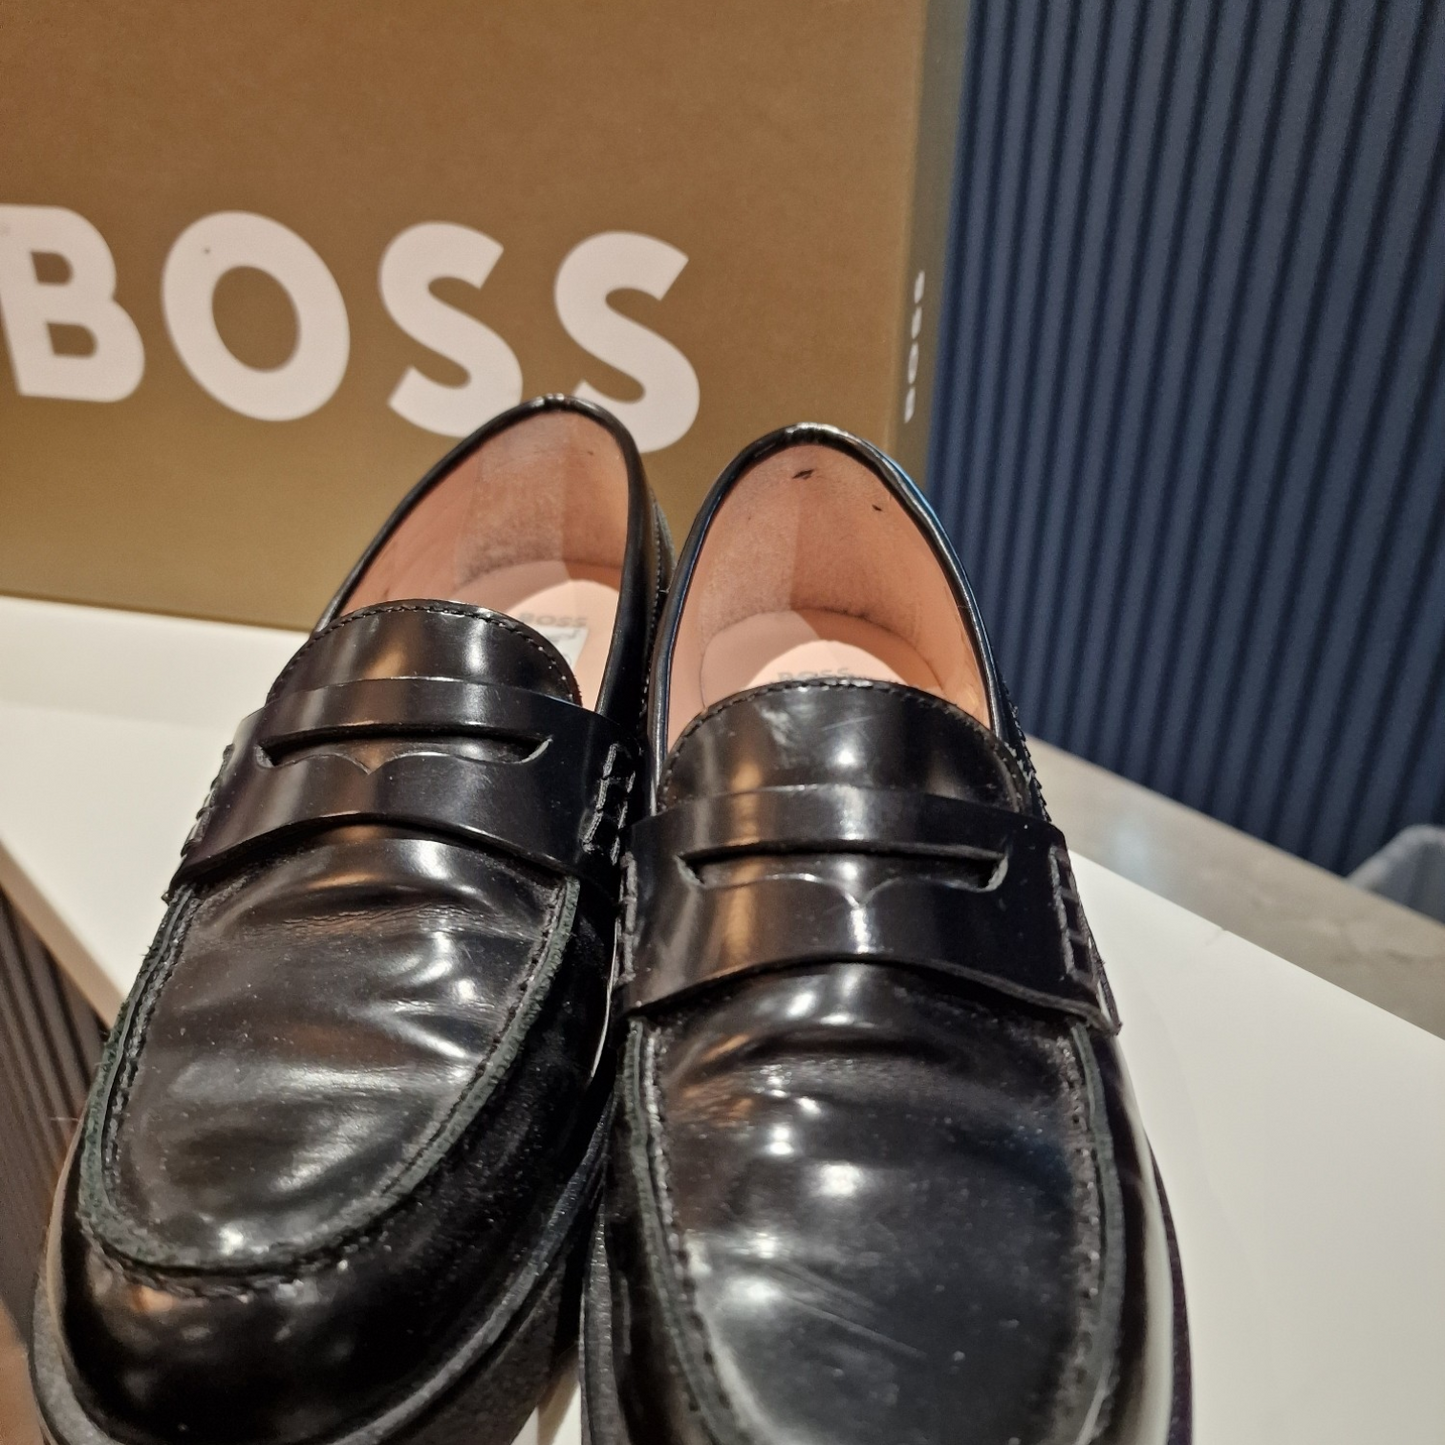 Boss black leather loafers, size 4/37